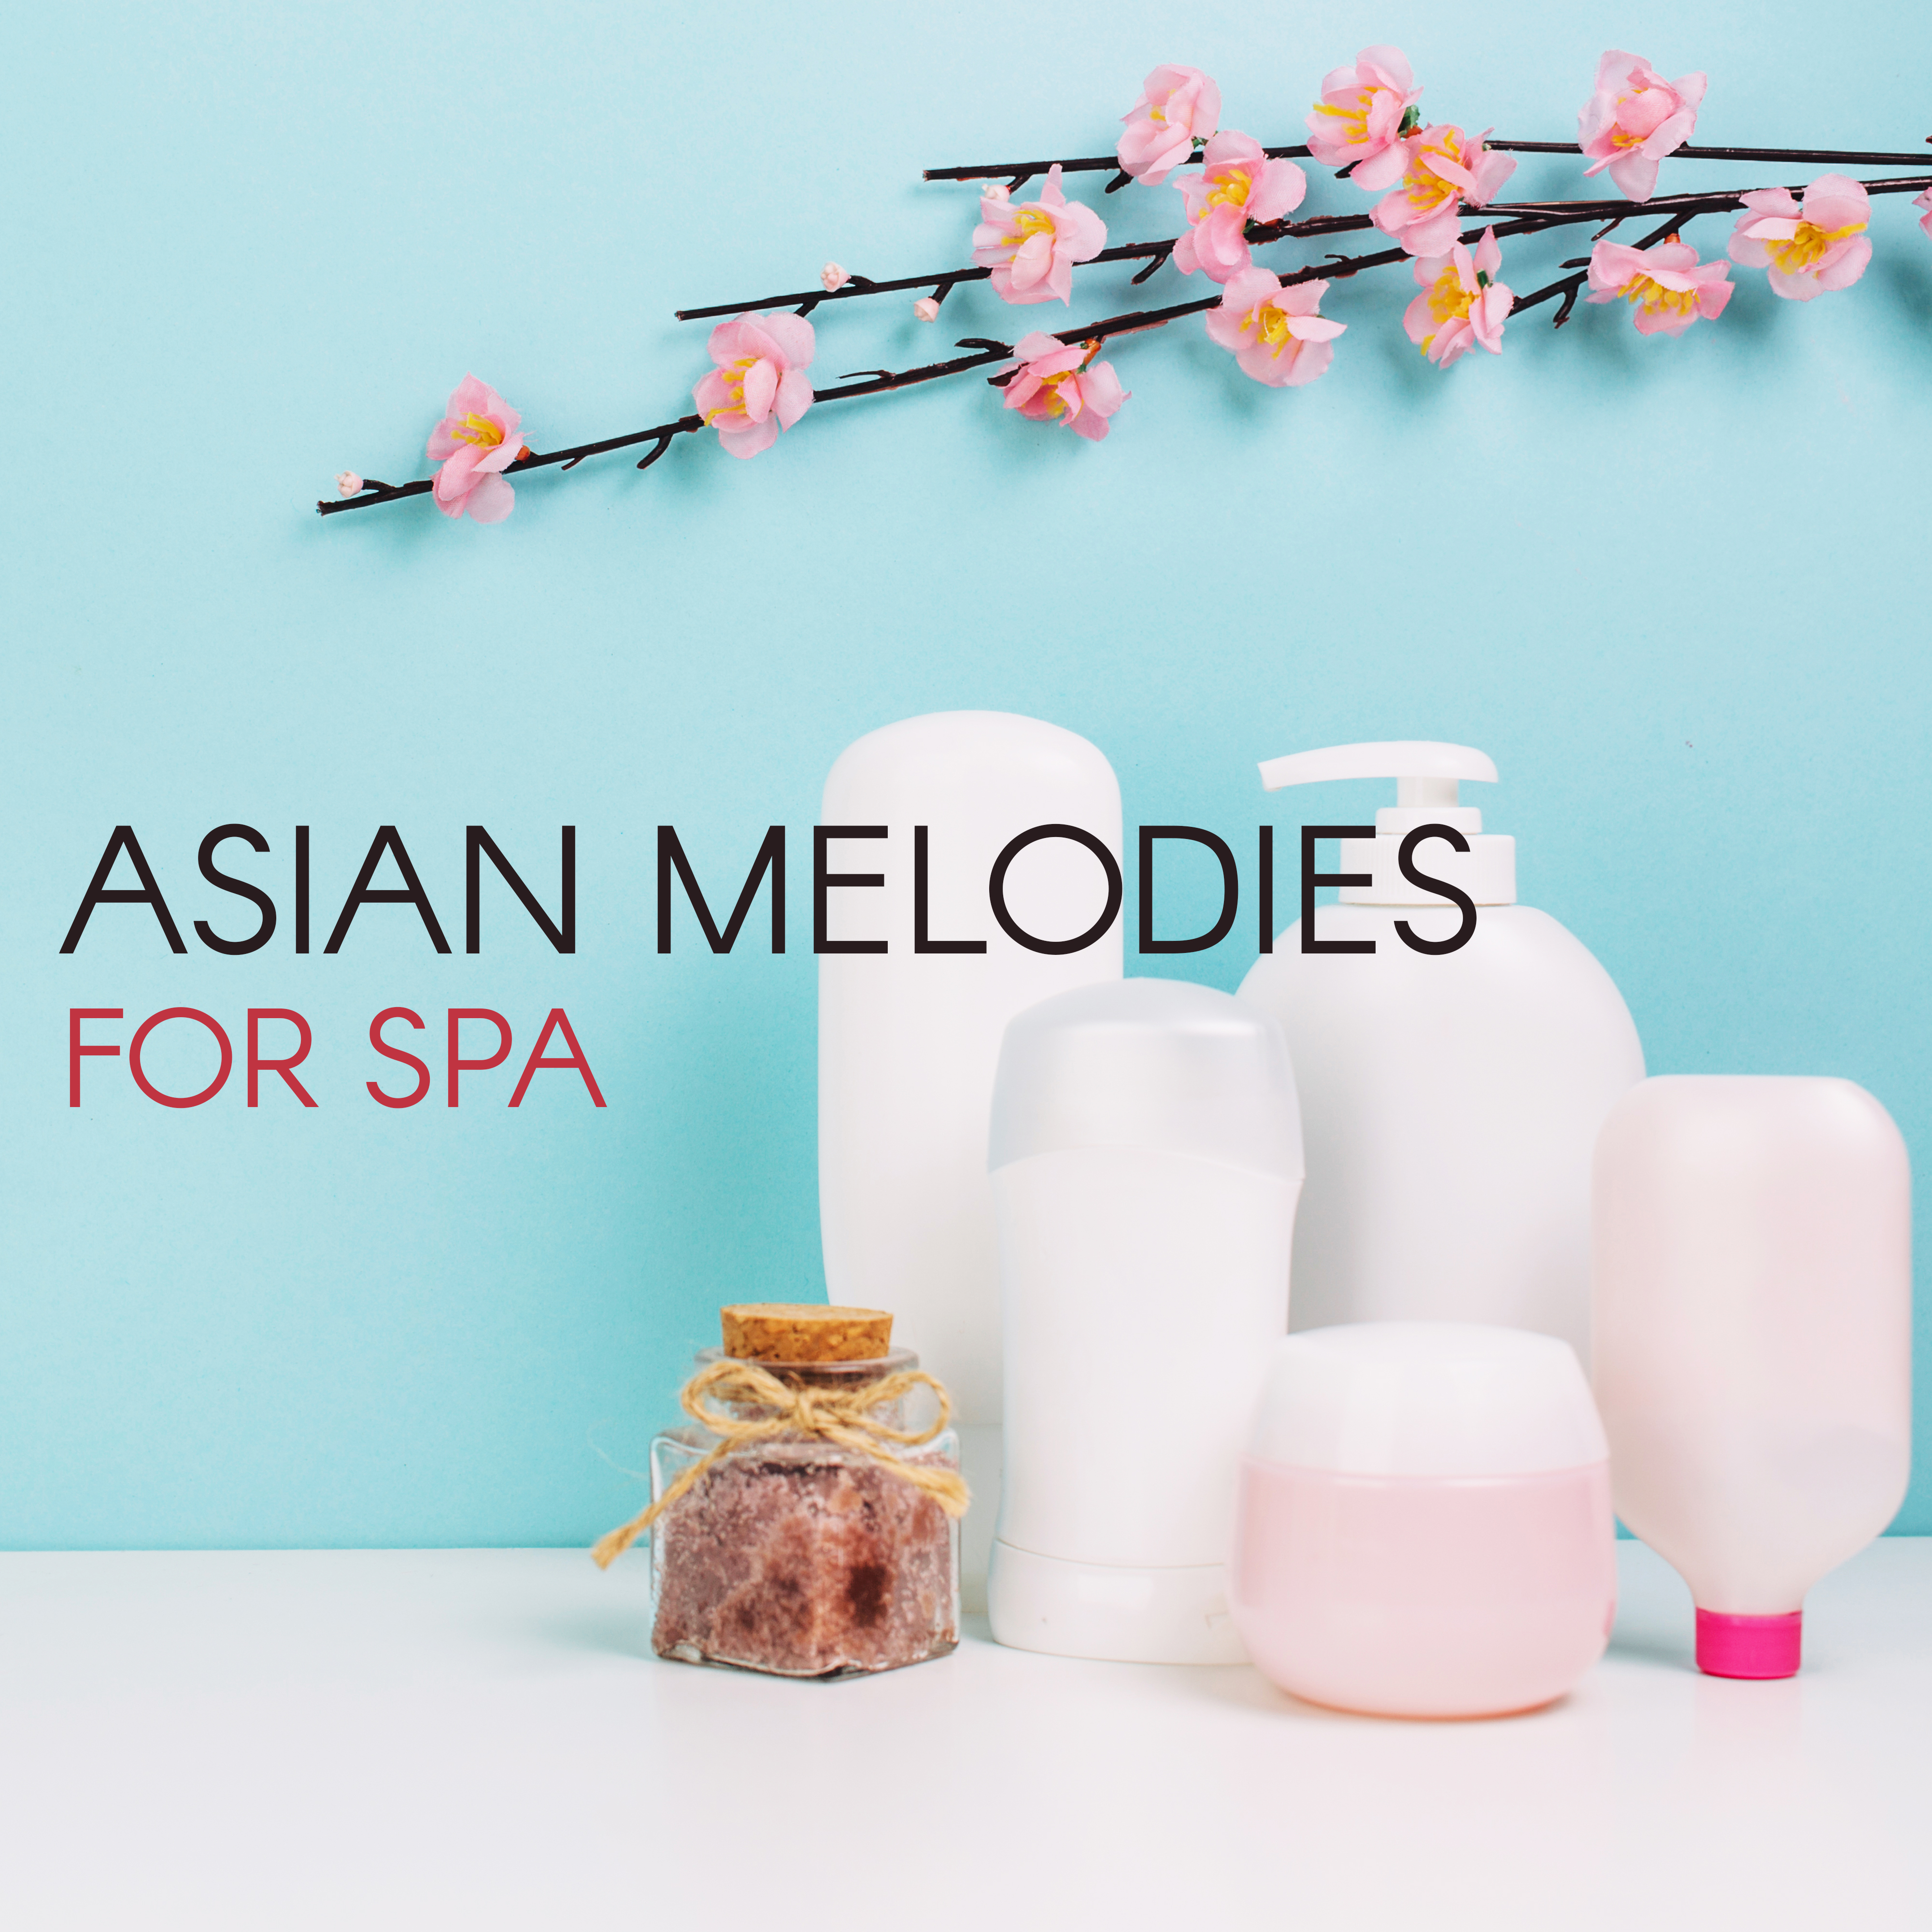 Asian Melodies for Spa